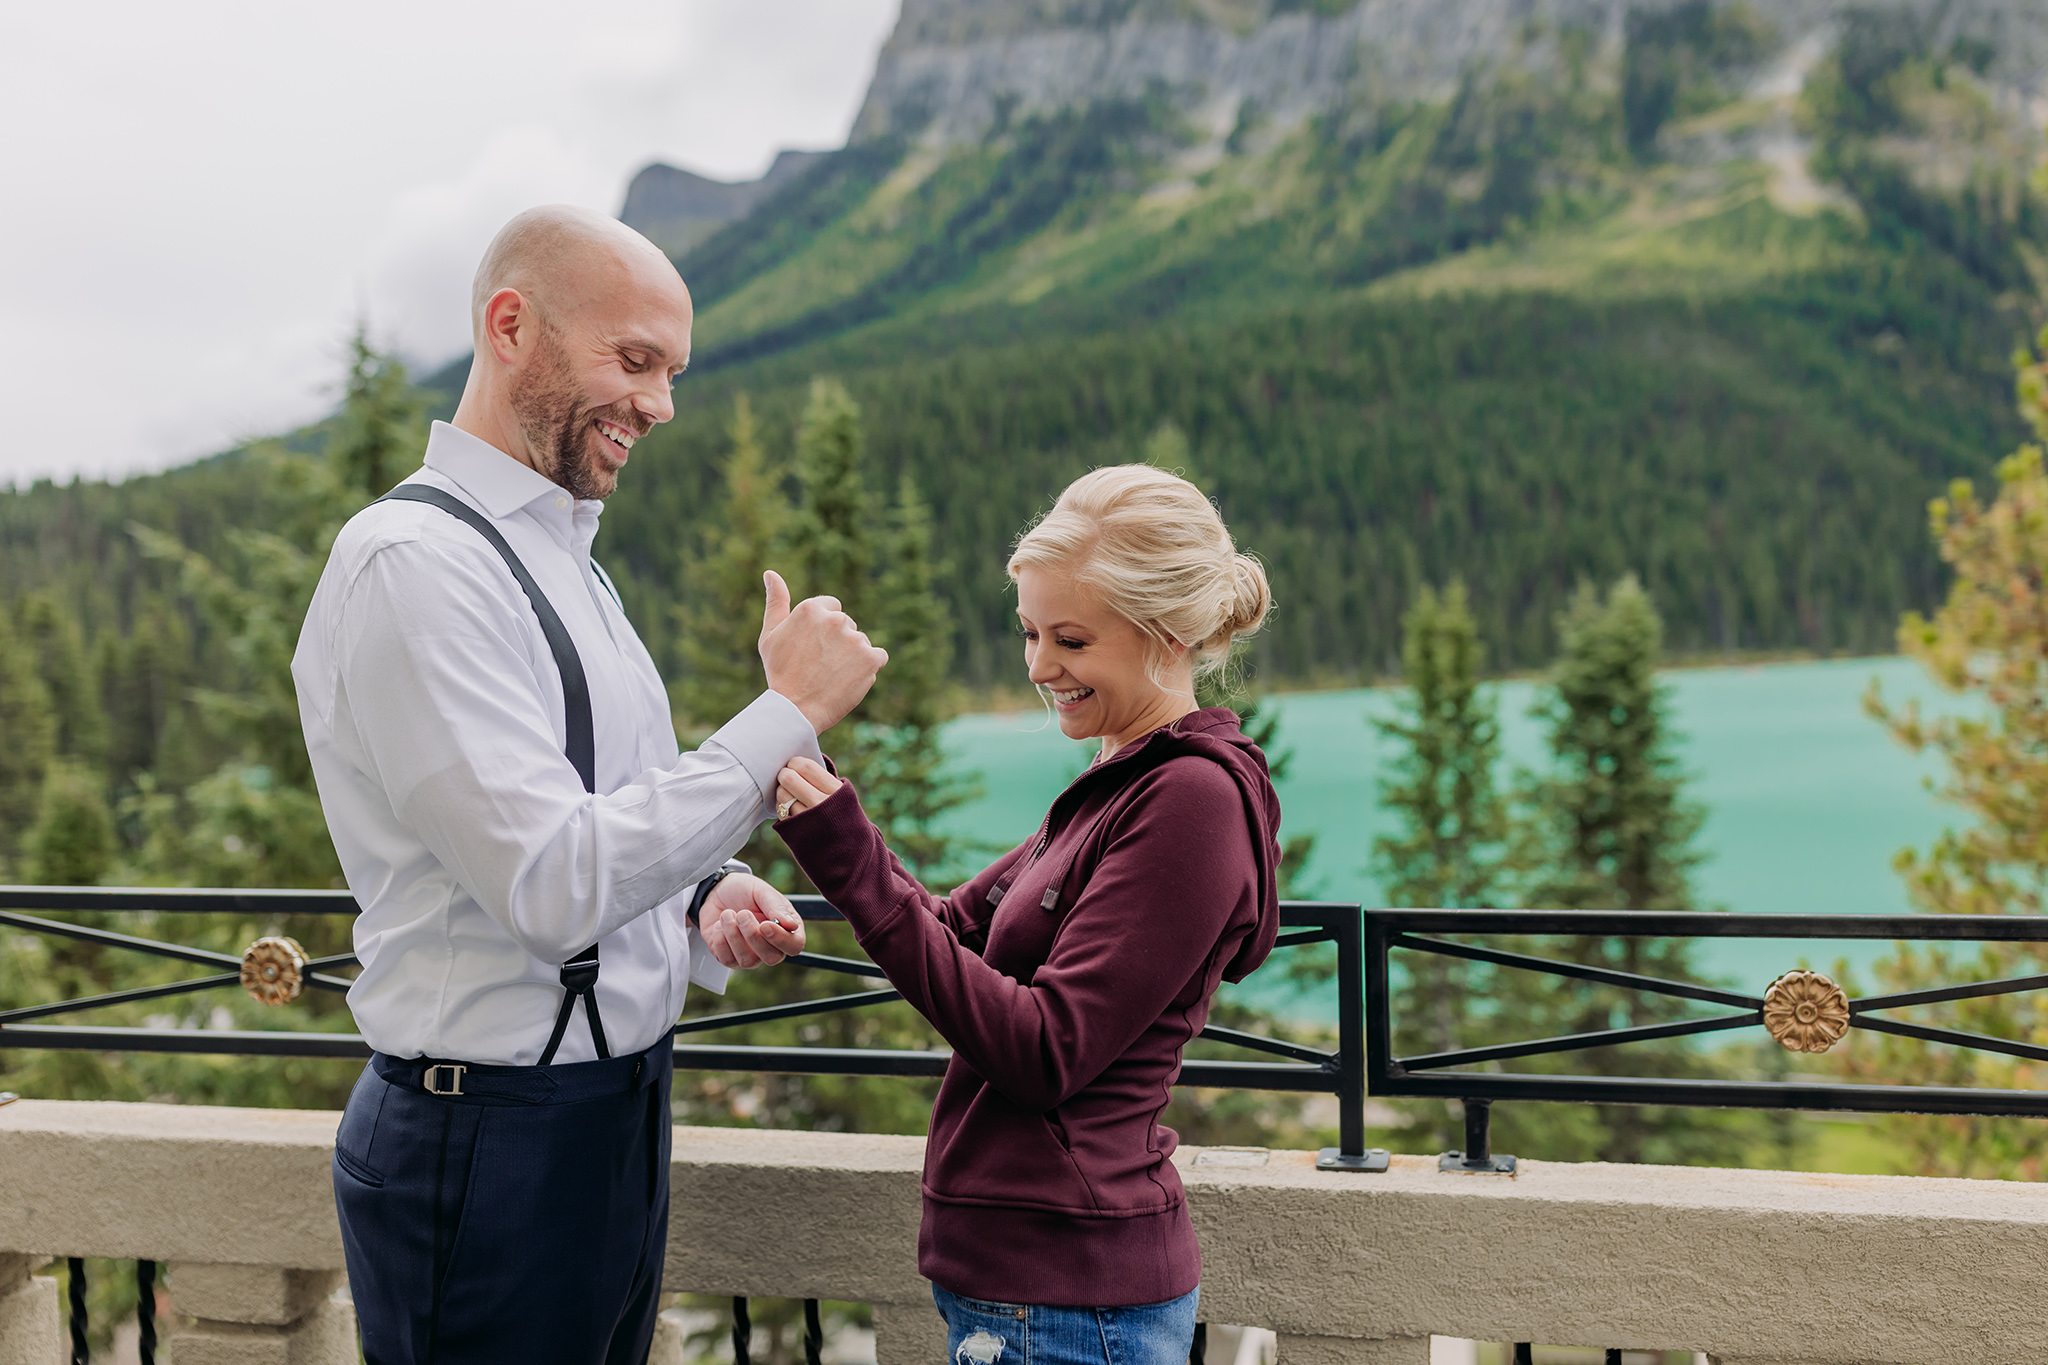 5 Tips for Planning your Dream Mountain Elopement Bride & groom getting ready for wedding together